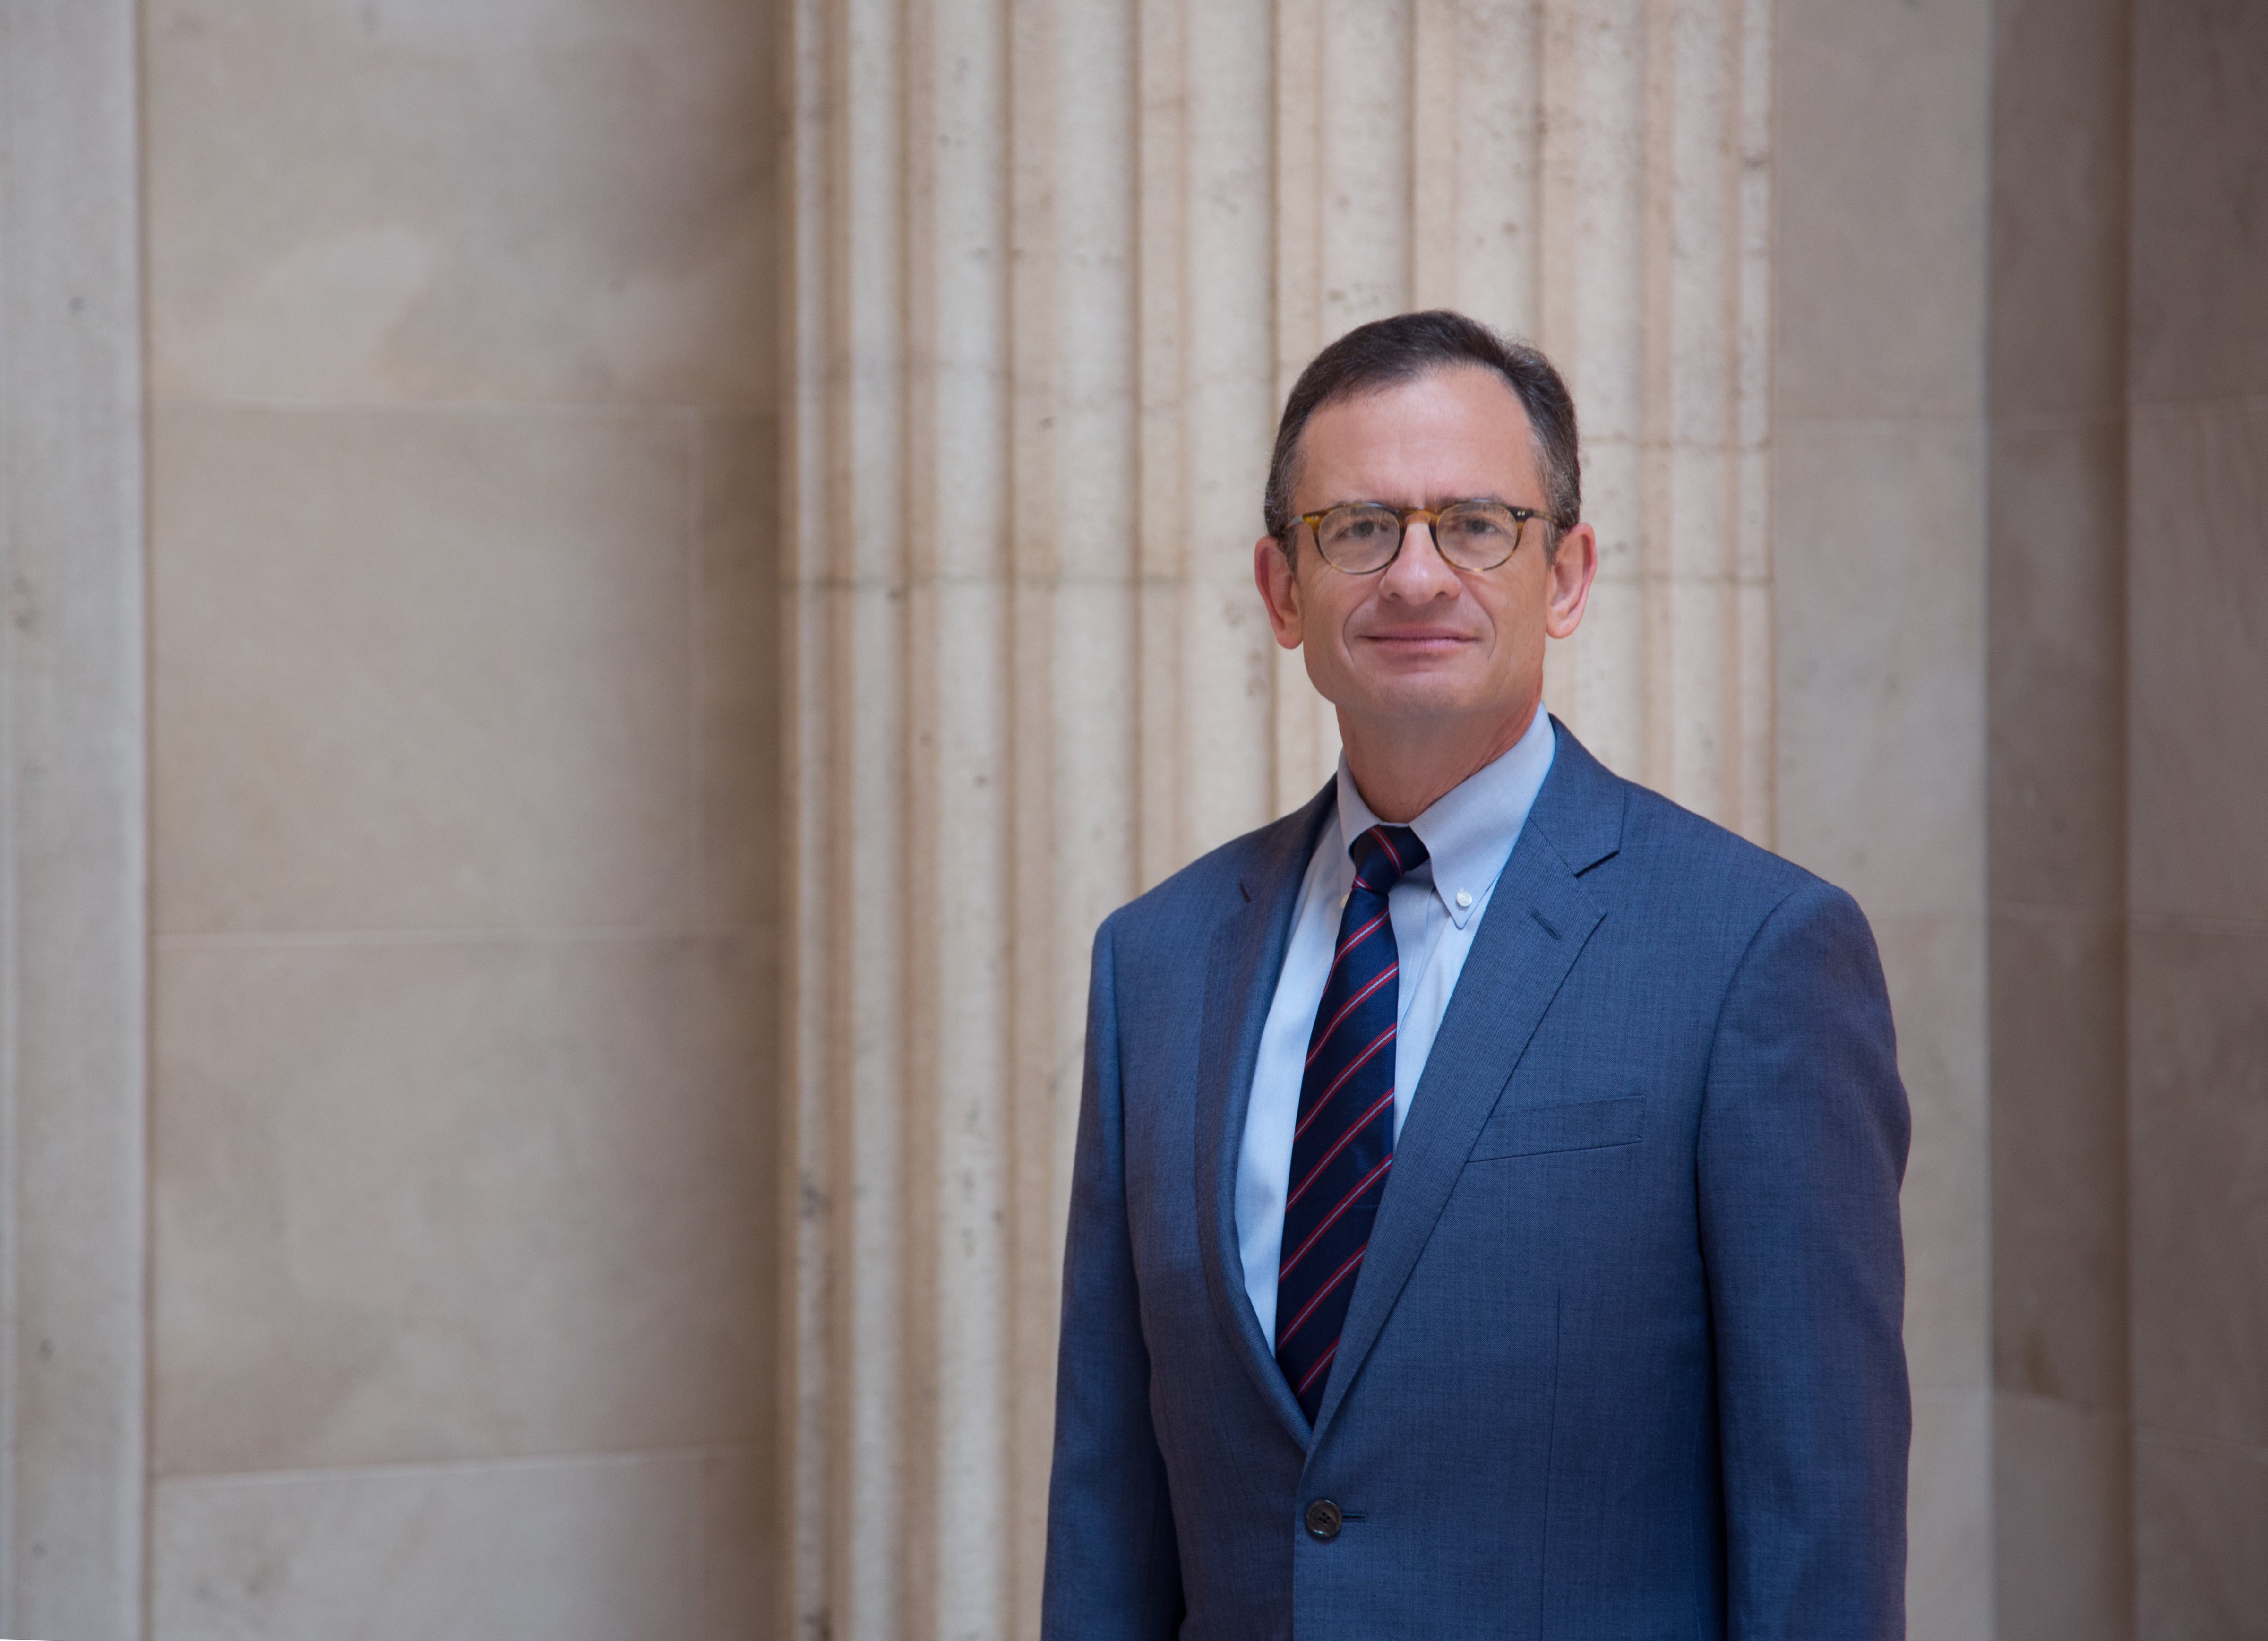 Daniel Weiss, president and CEO of the Metropolitan Museum of Art (courtesy of the Met)